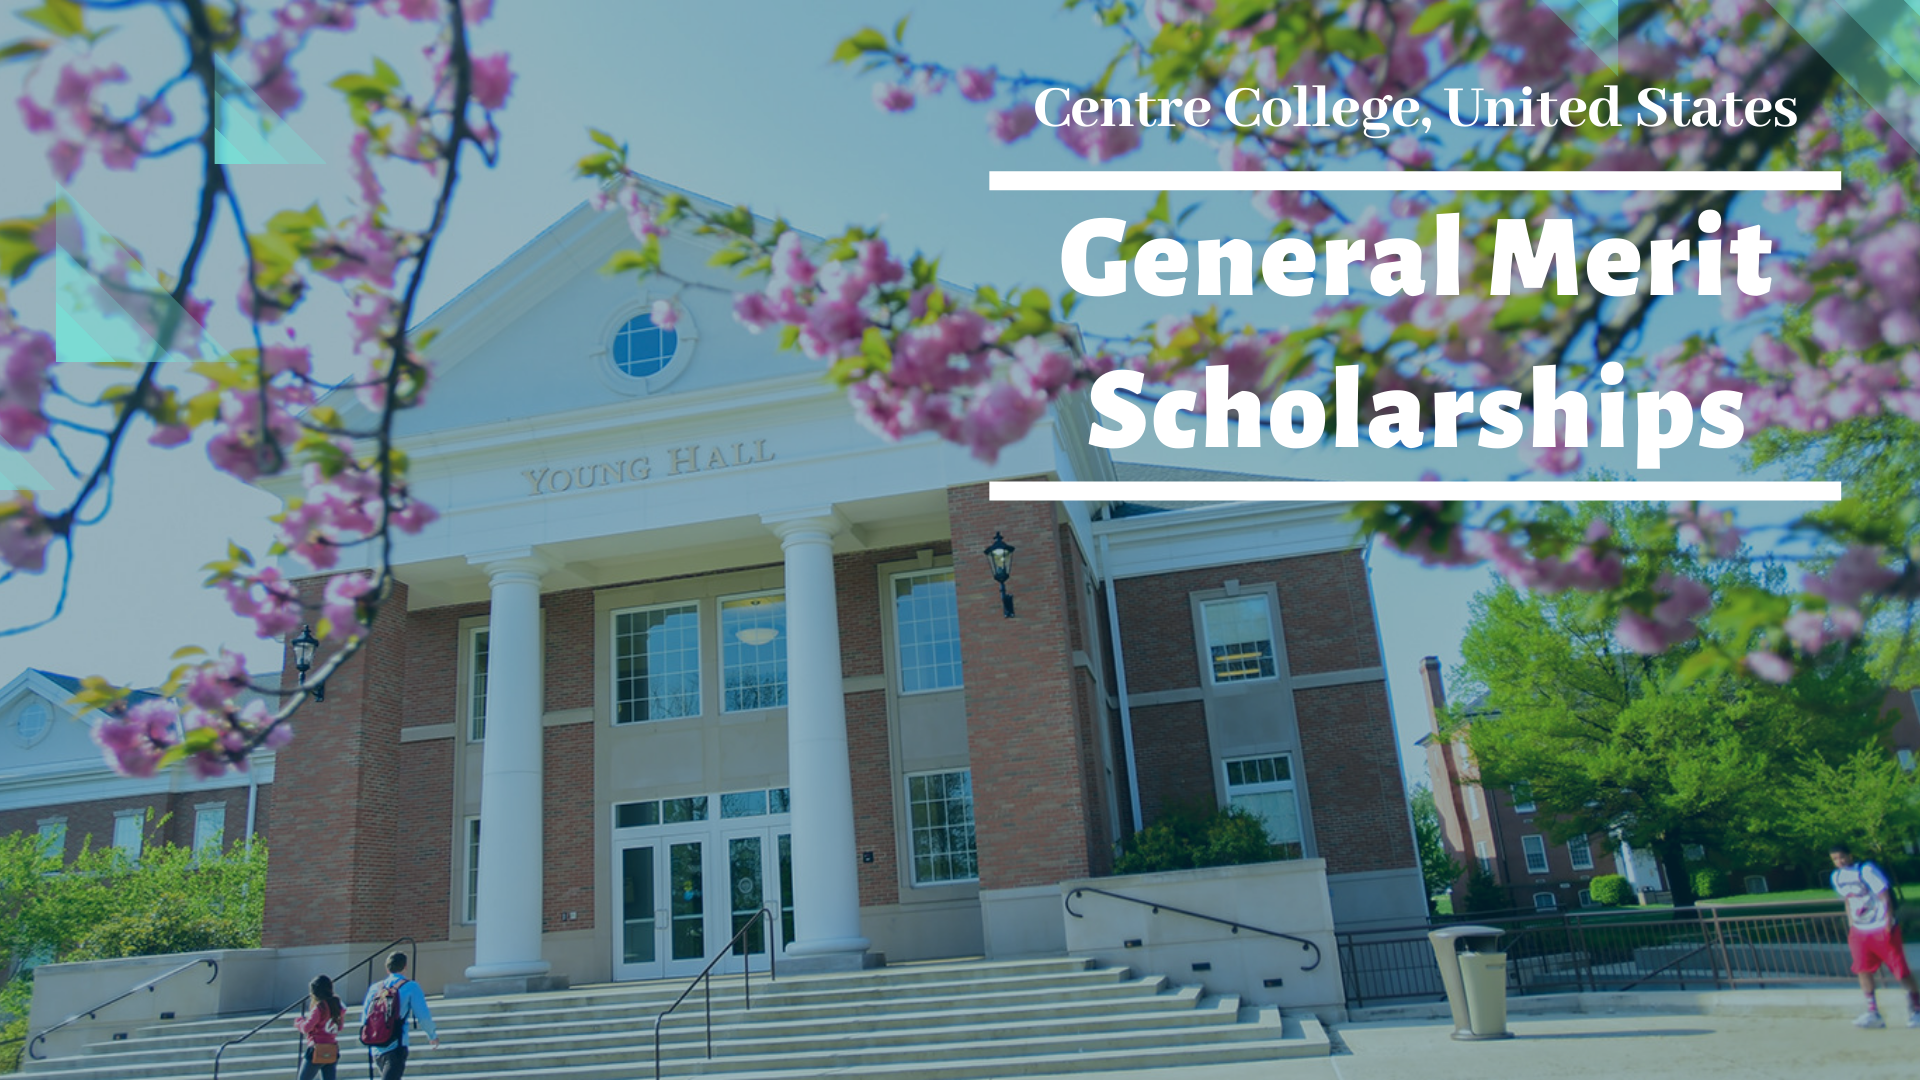 General Merit Scholarships at Centre College, United States - Scholarship  Positions 2021 2022